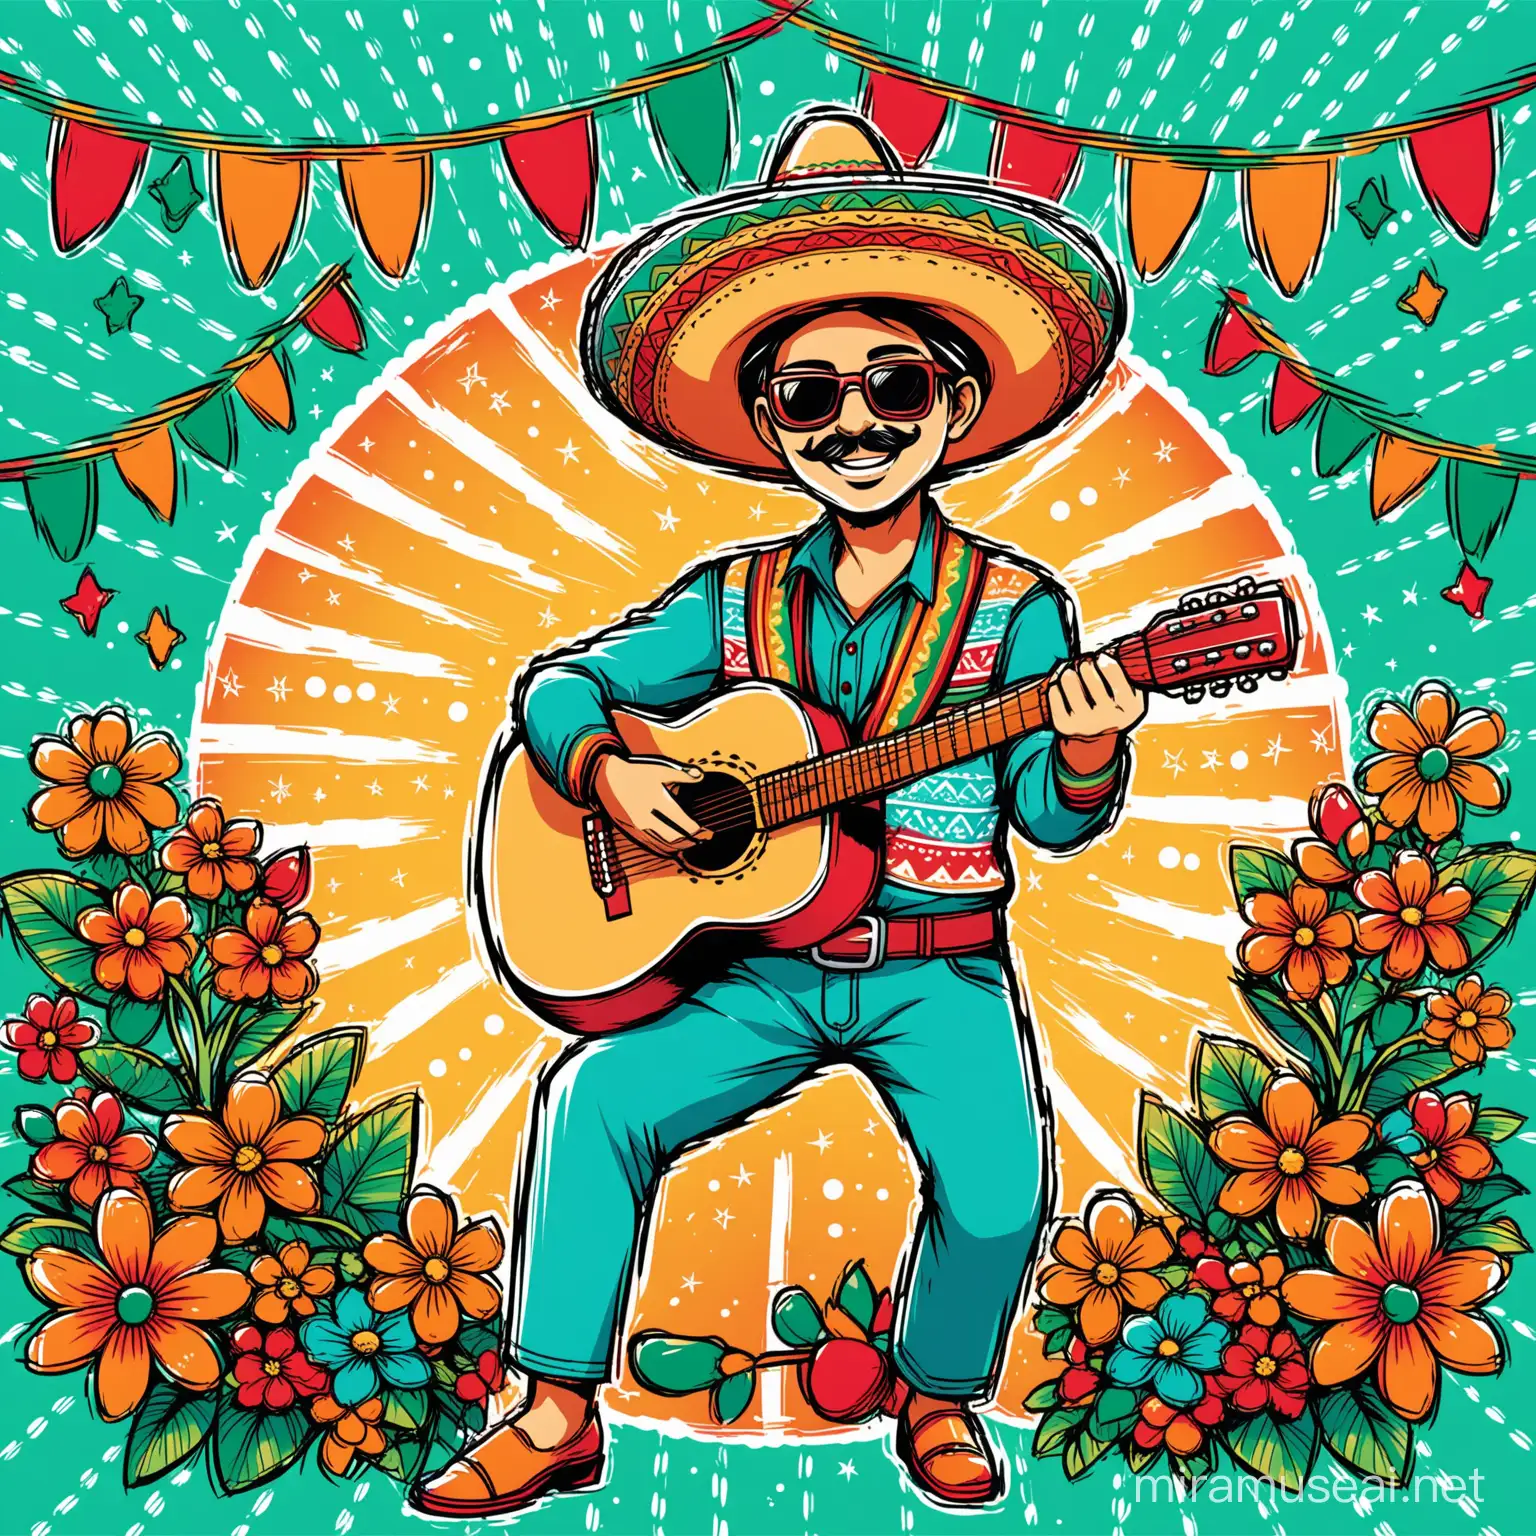 A vibrant and festive vector illustration of a guitar player wearing a sombrero, celebrating Cinco de Mayo. The guitar has a colorful design with a Mexican flag motif, and the hat is adorned with flowers. The retro lineart style creates a nostalgic feel, with the guitar player's pose exuding confidence and joy. The background is a cheerful blend of colors, including shades of orange, green, and blue, creating a lively and festive atmosphere.